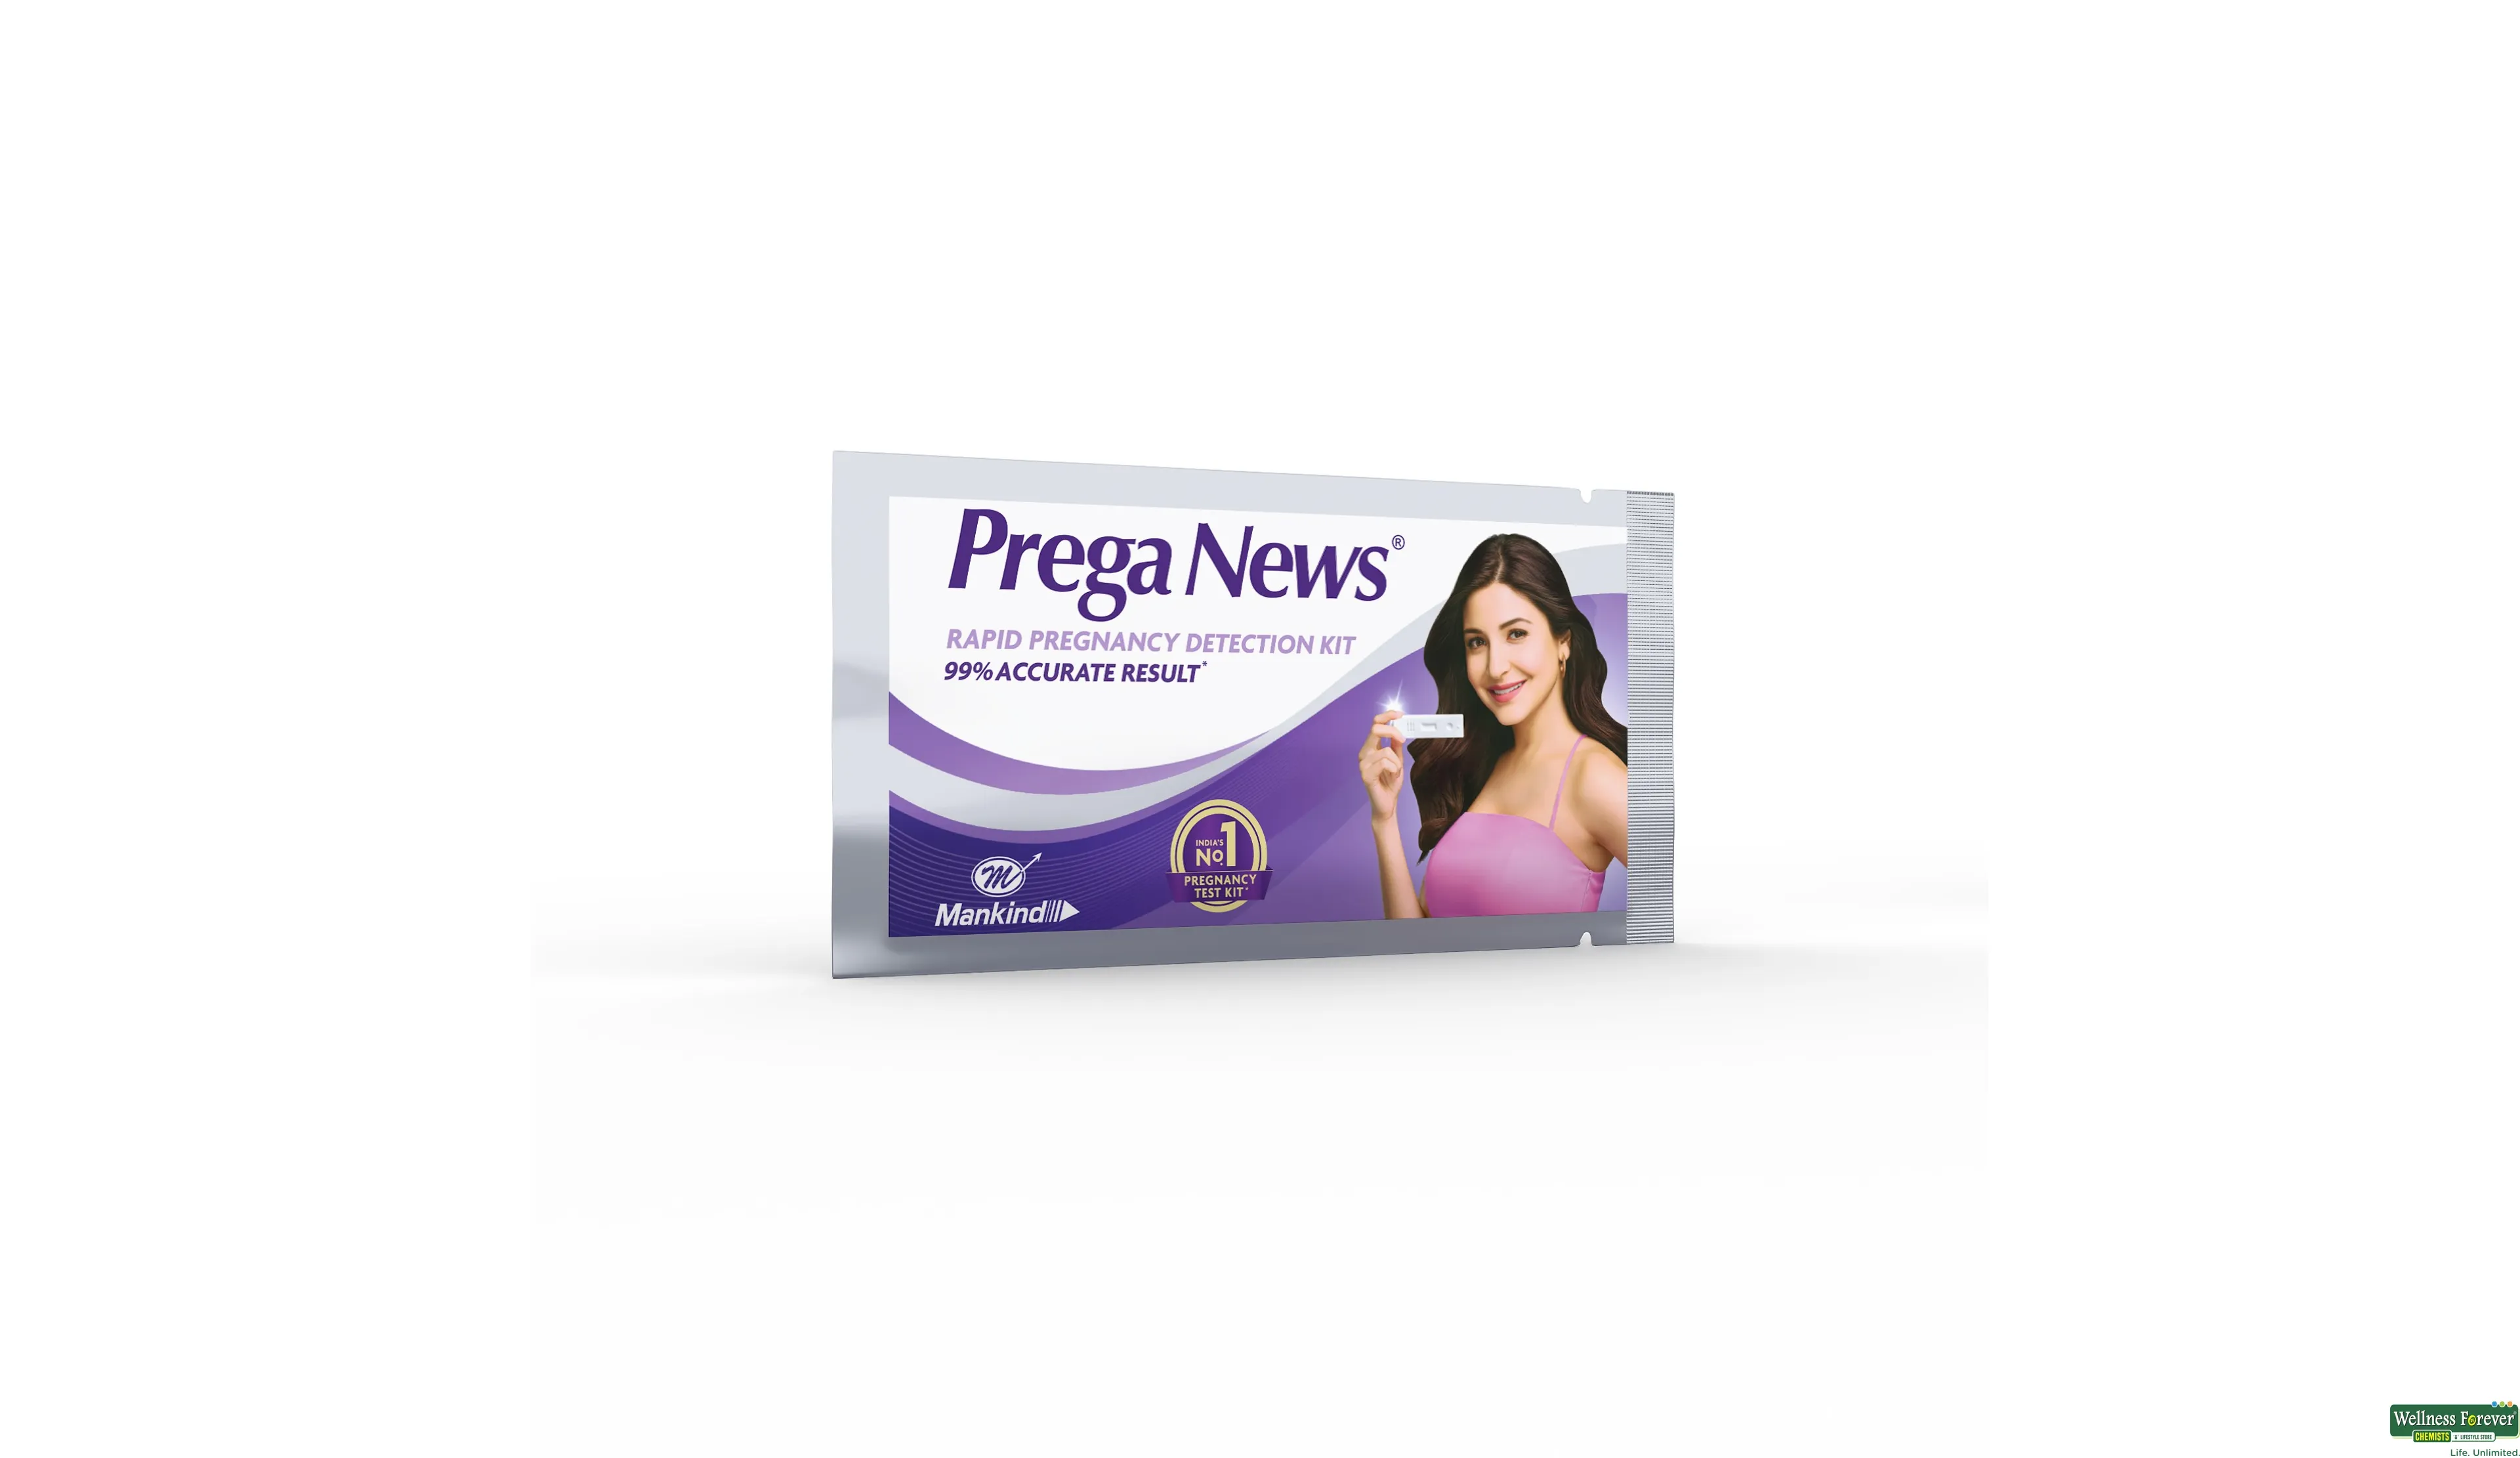 PREGA-NEWS PREG TEST- 3, 1PC, Quick and easy to use
Highly accurate results within minutes
Can be used in the privacy of your home
Cost-effective compared to lab tests
Early detection helps in prompt prenatal care